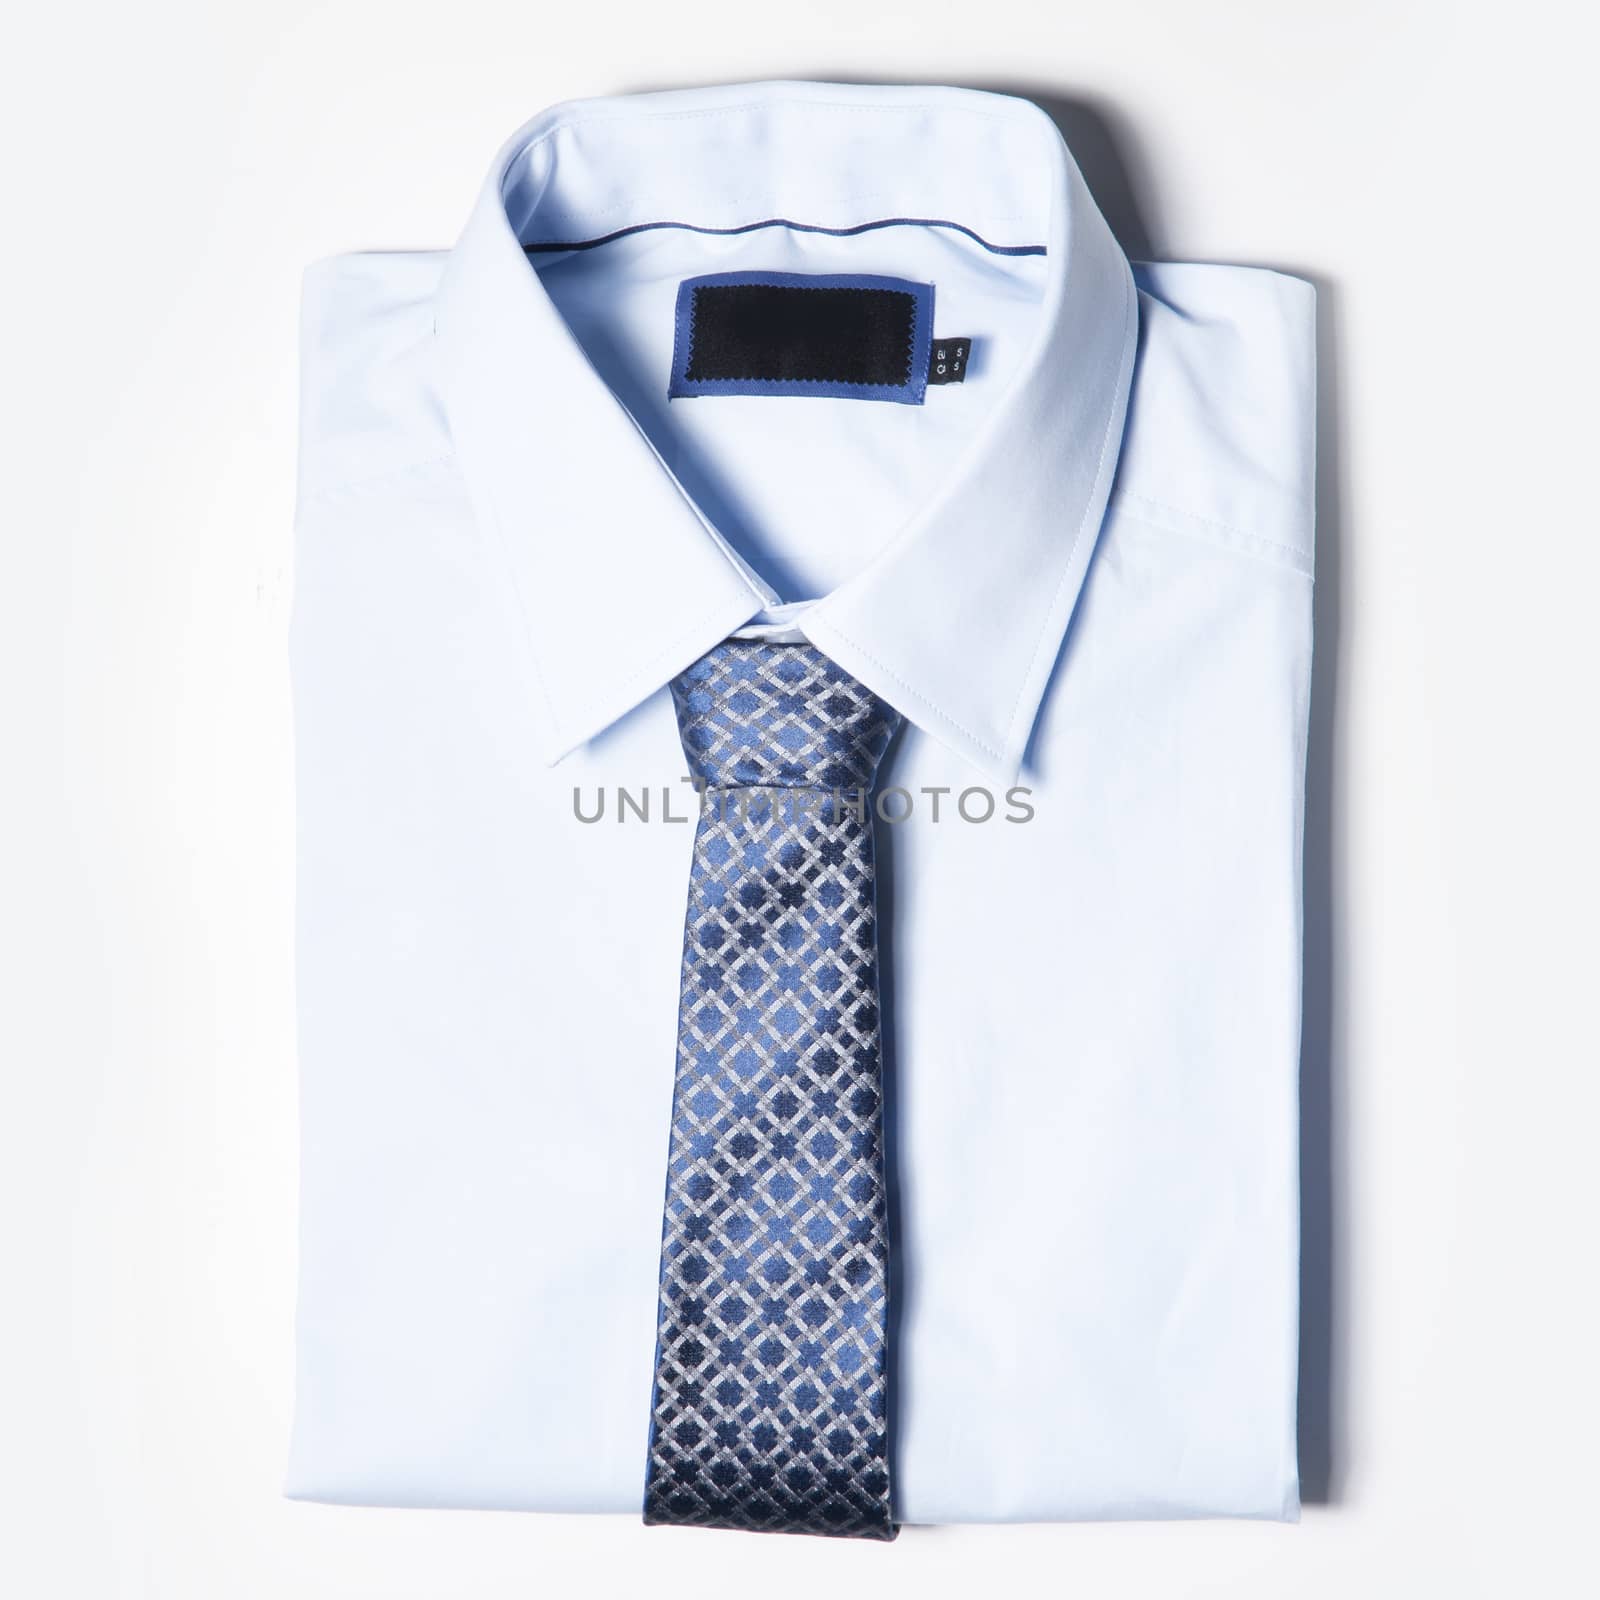 Set of trendy Men clothing is on white background. Shirt and tie